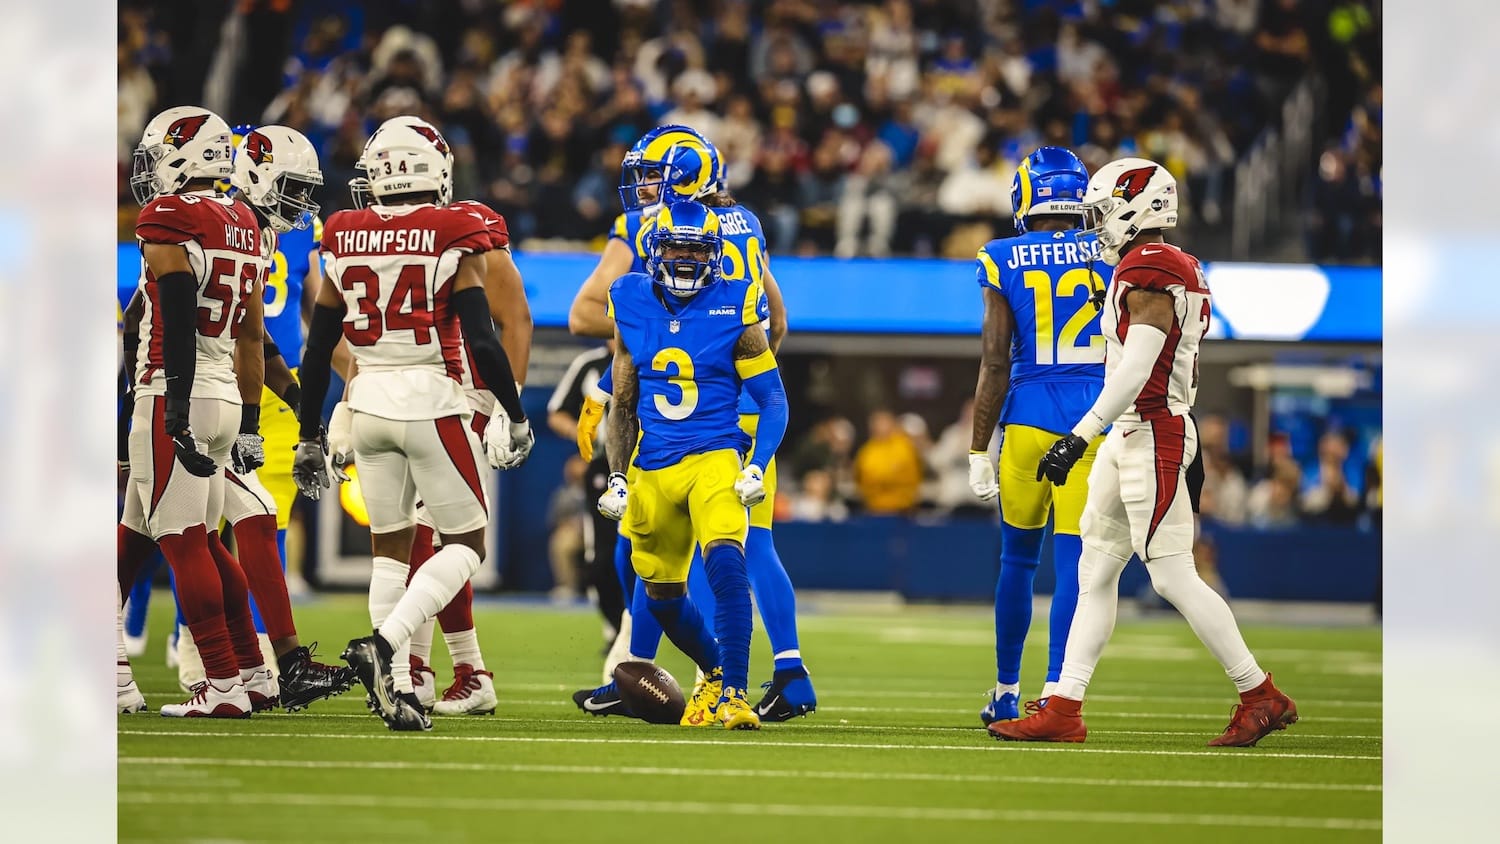 Beckham And Stafford Get Their First Playoff Wins As Rams Move On To Divisional Round